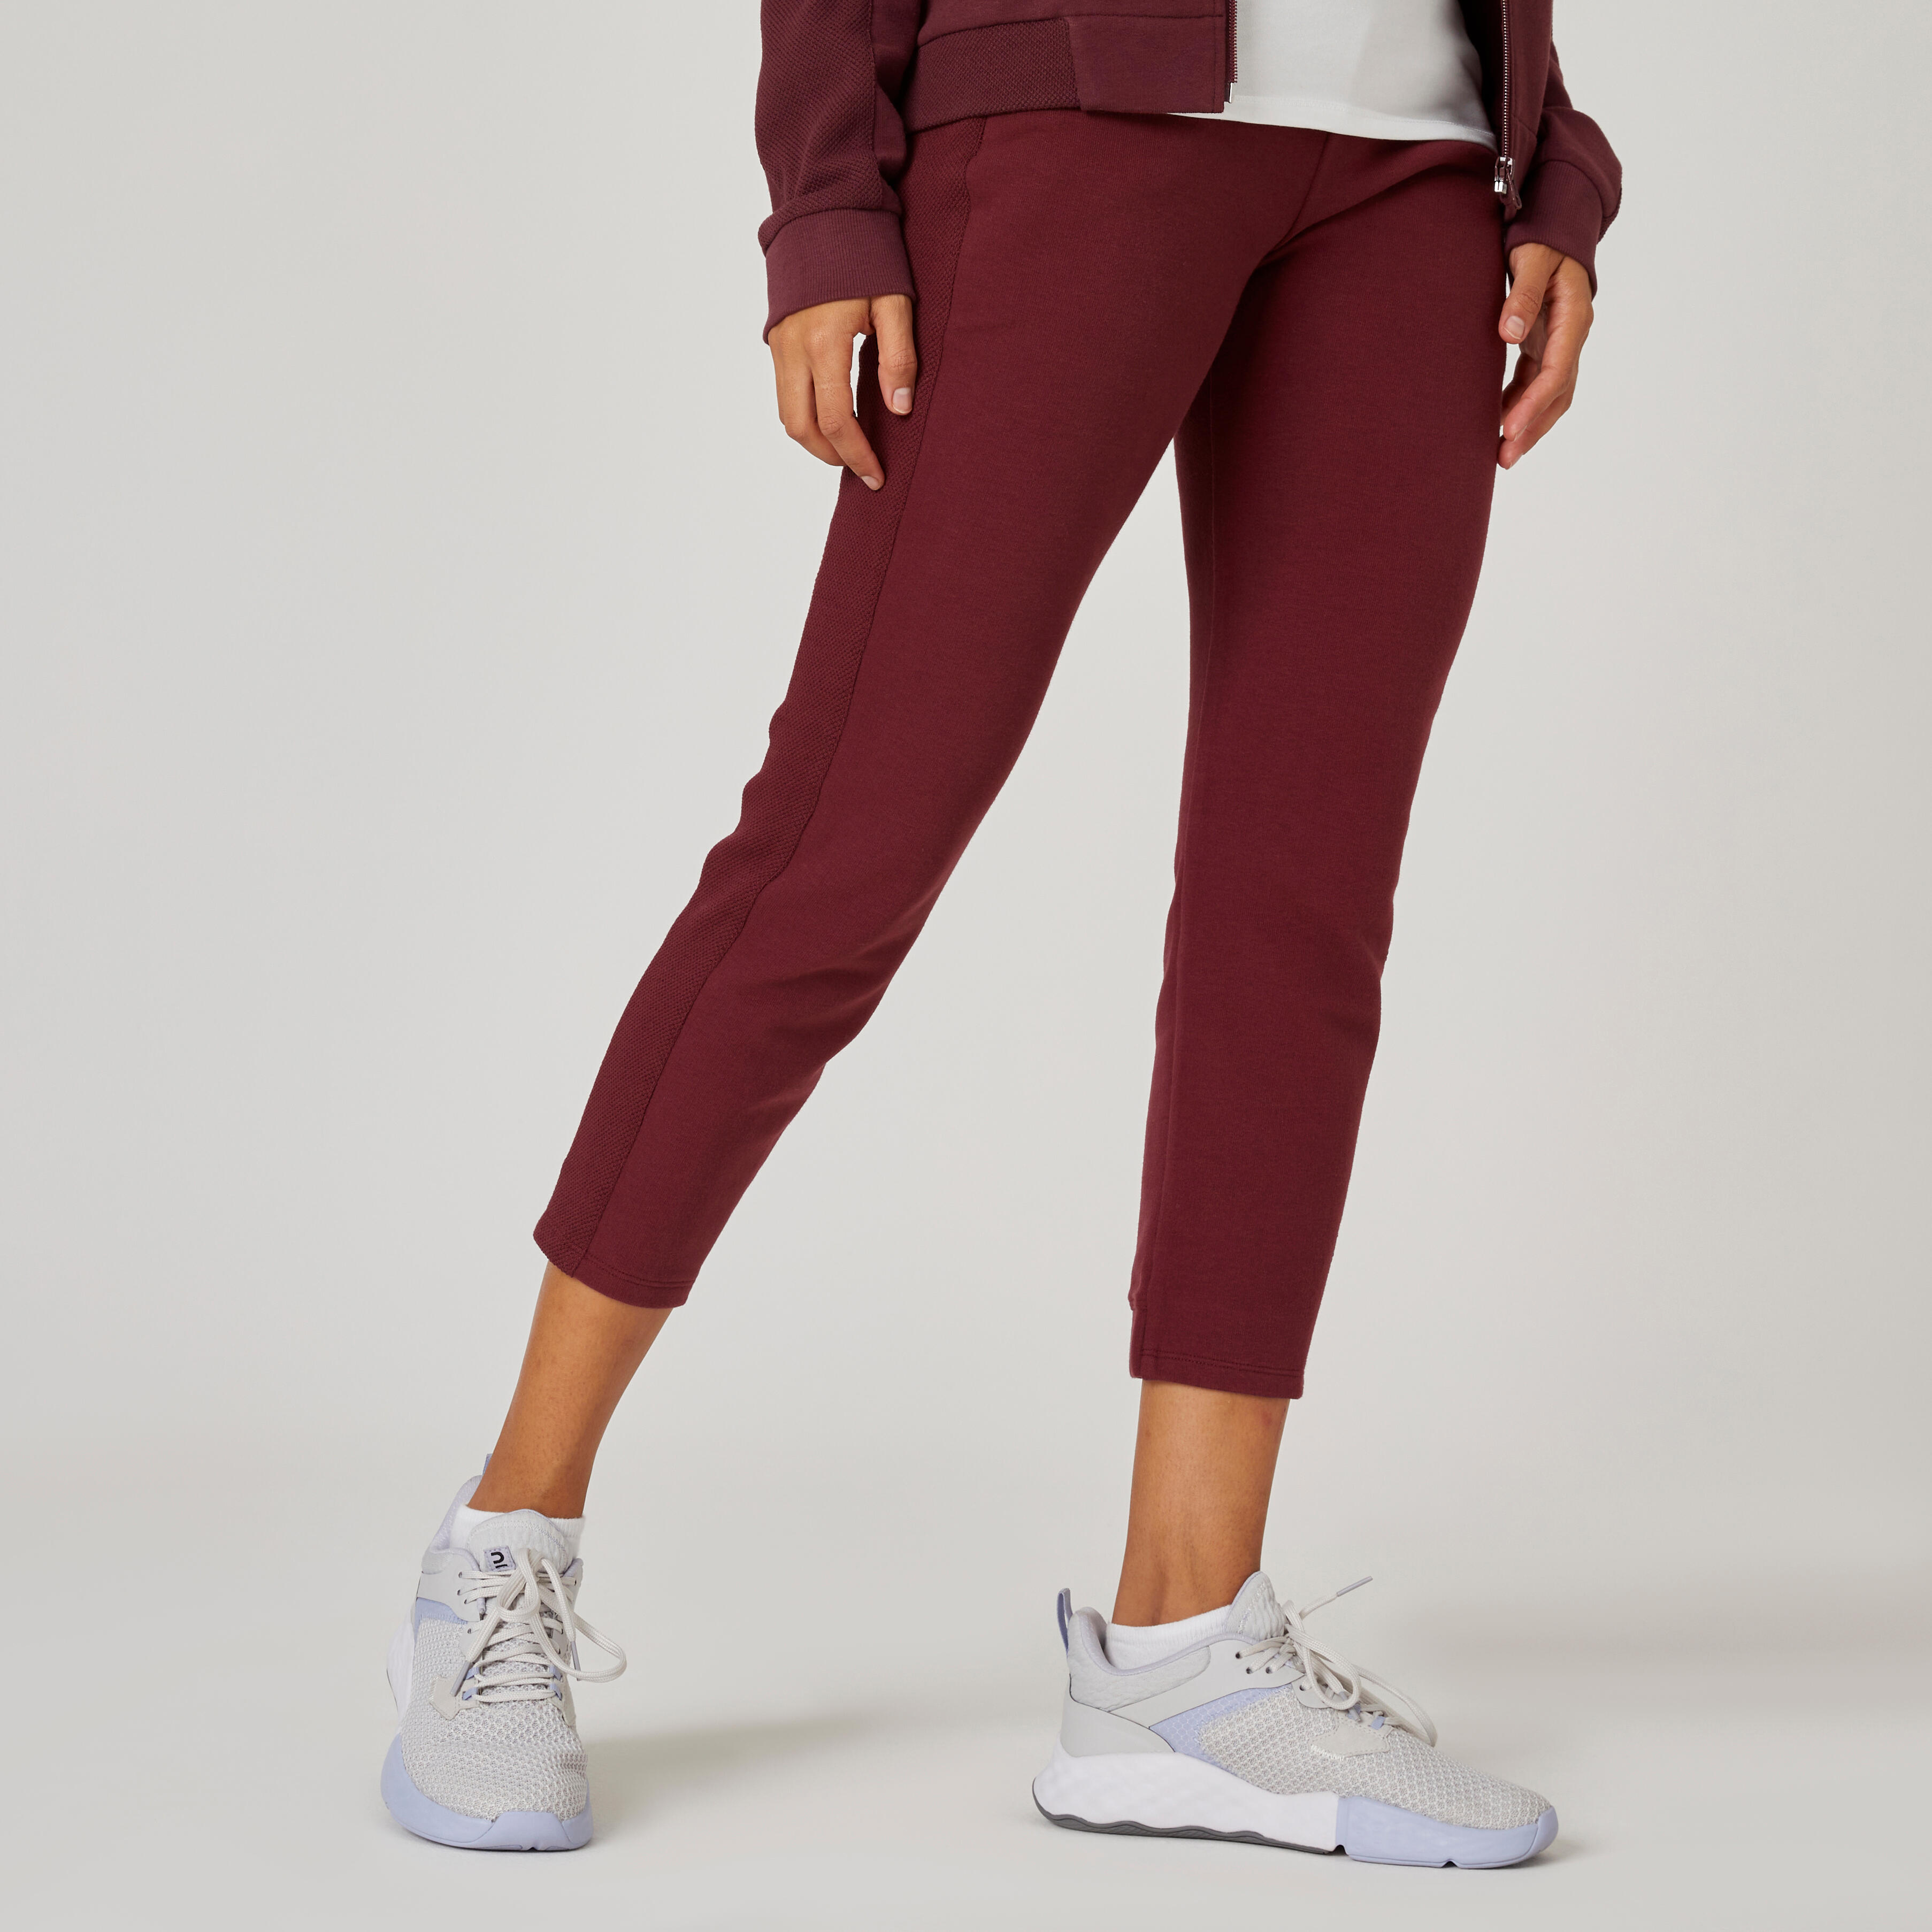 How to Wear Burgundy Pants | Outfits with leggings, Burgundy pants, Burgundy  pants outfit